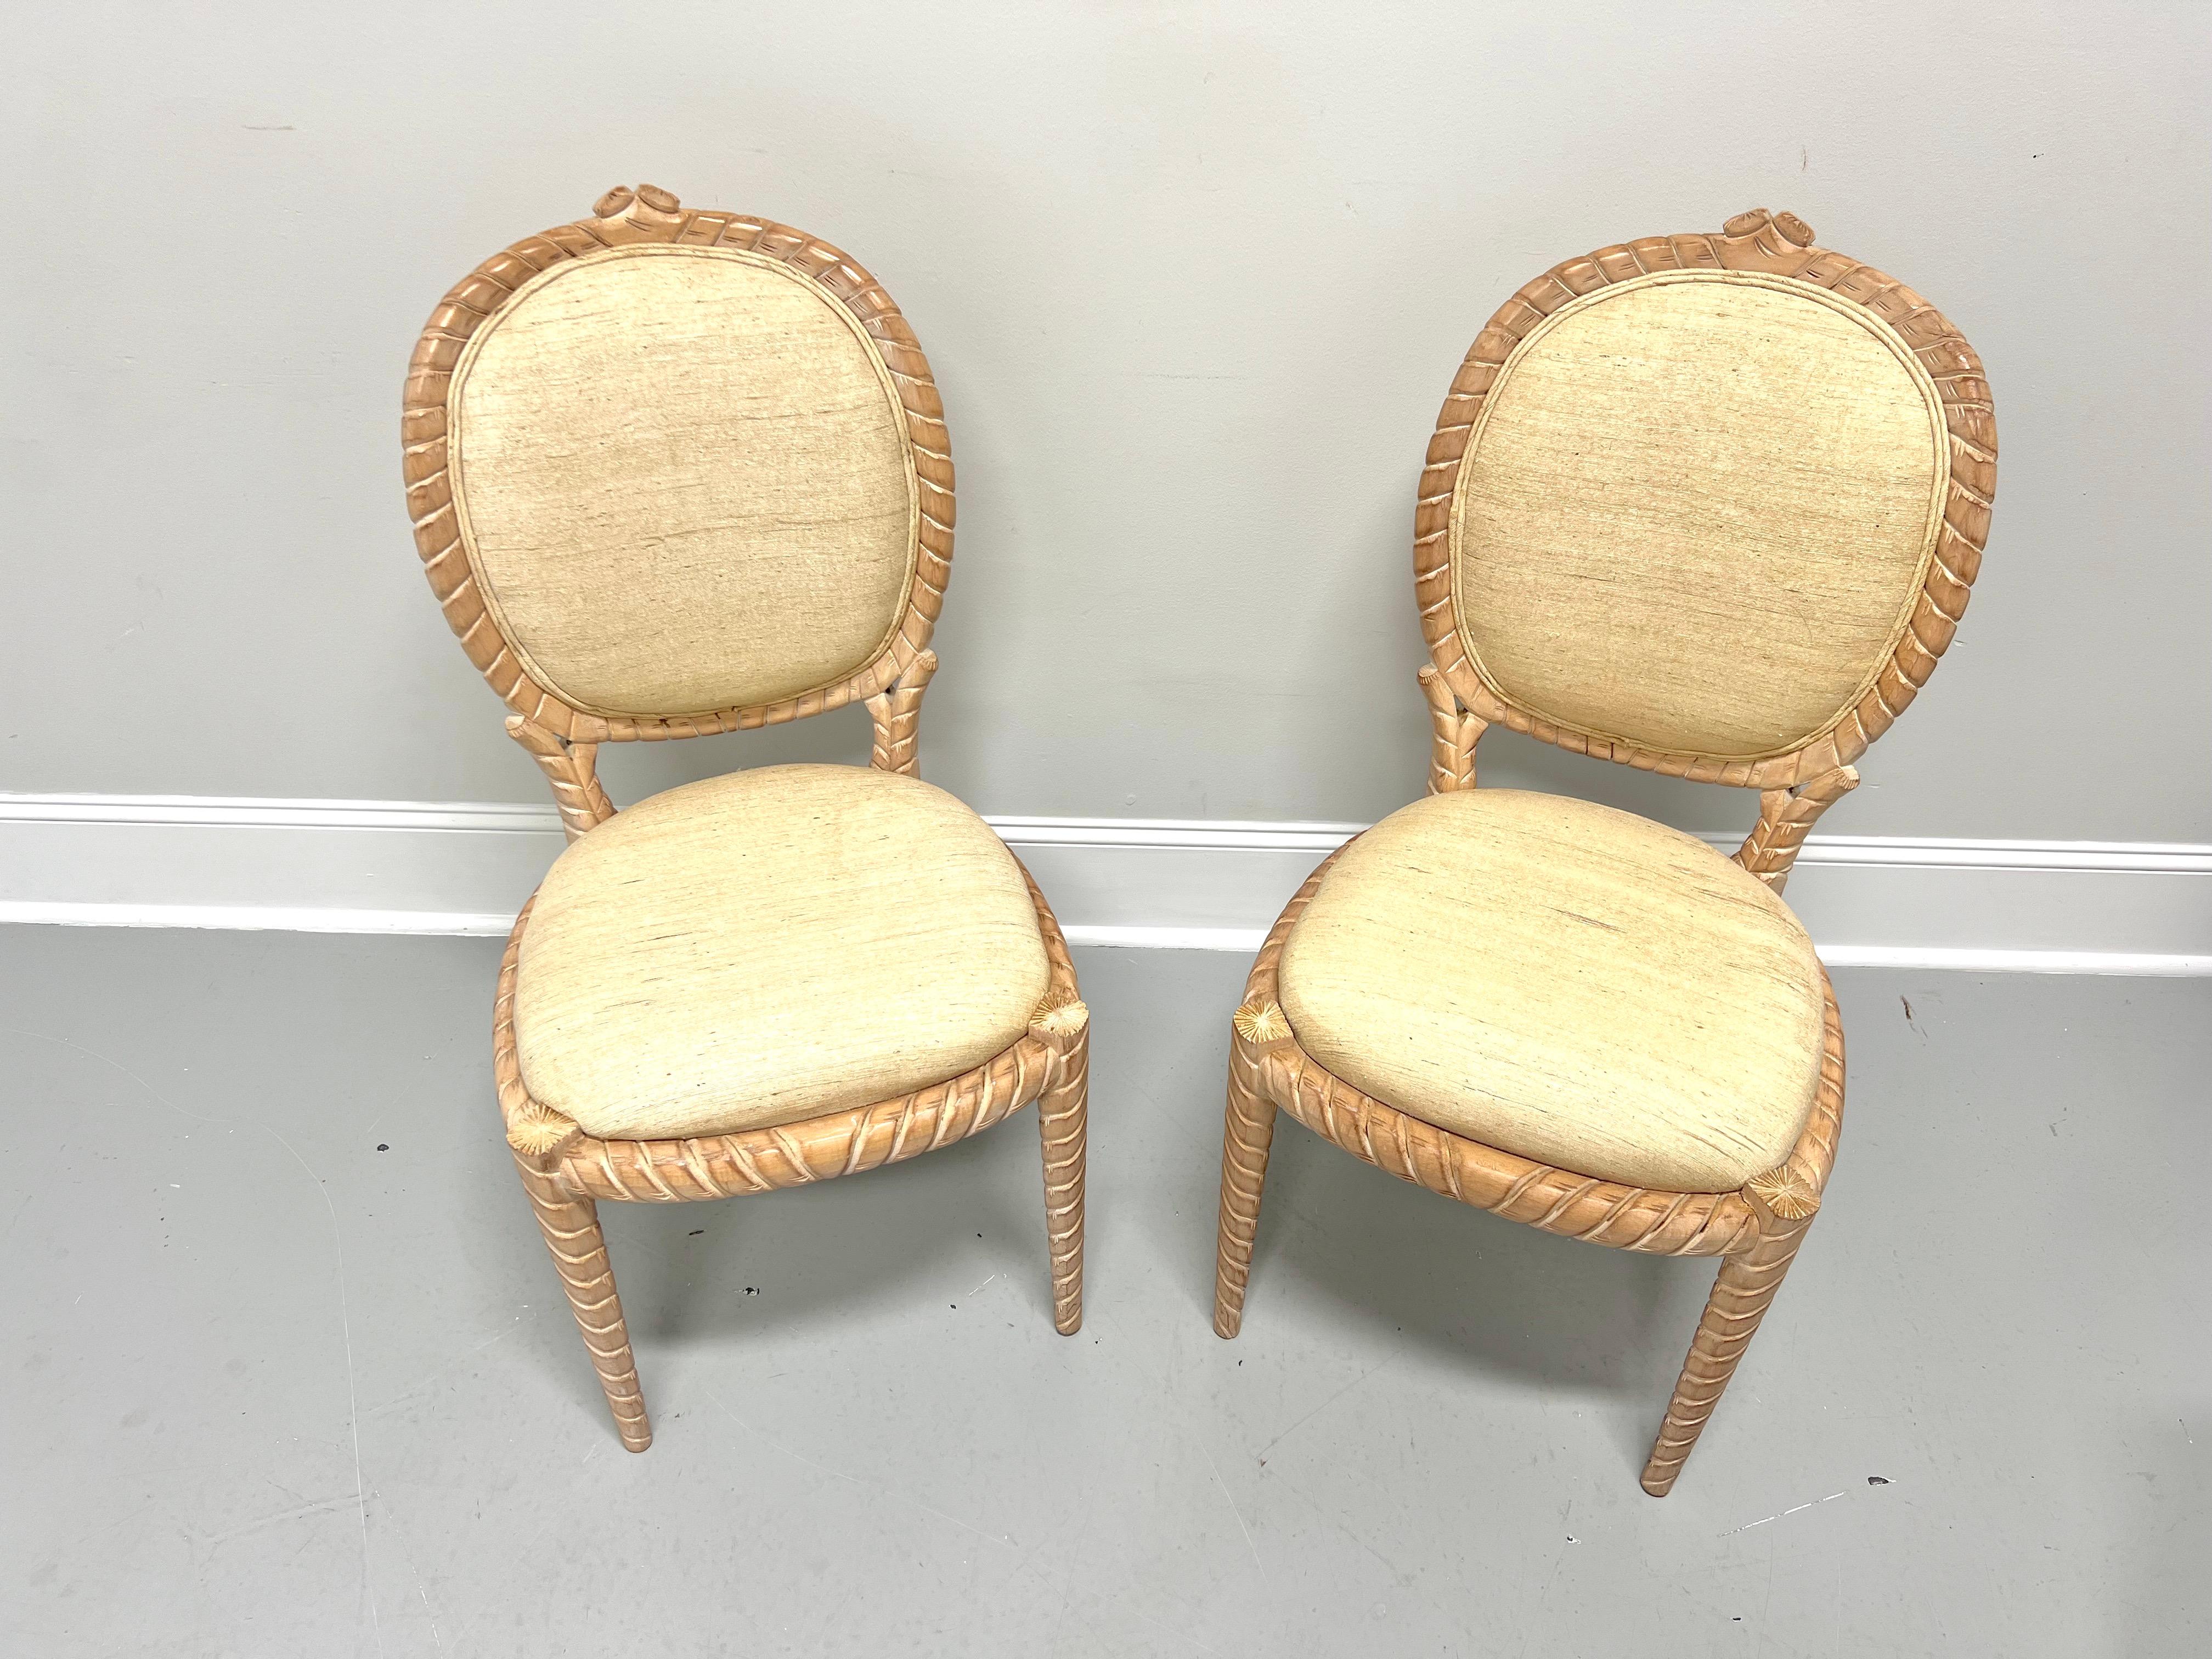 A pair of dining side chairs in the Boho Chic style, unbranded. Solid hardwood with whitewashed & distressed finish, decoratively carved rope twist to the oval shaped backrest, the apron, and tapered straight legs. Chair backs and seats are